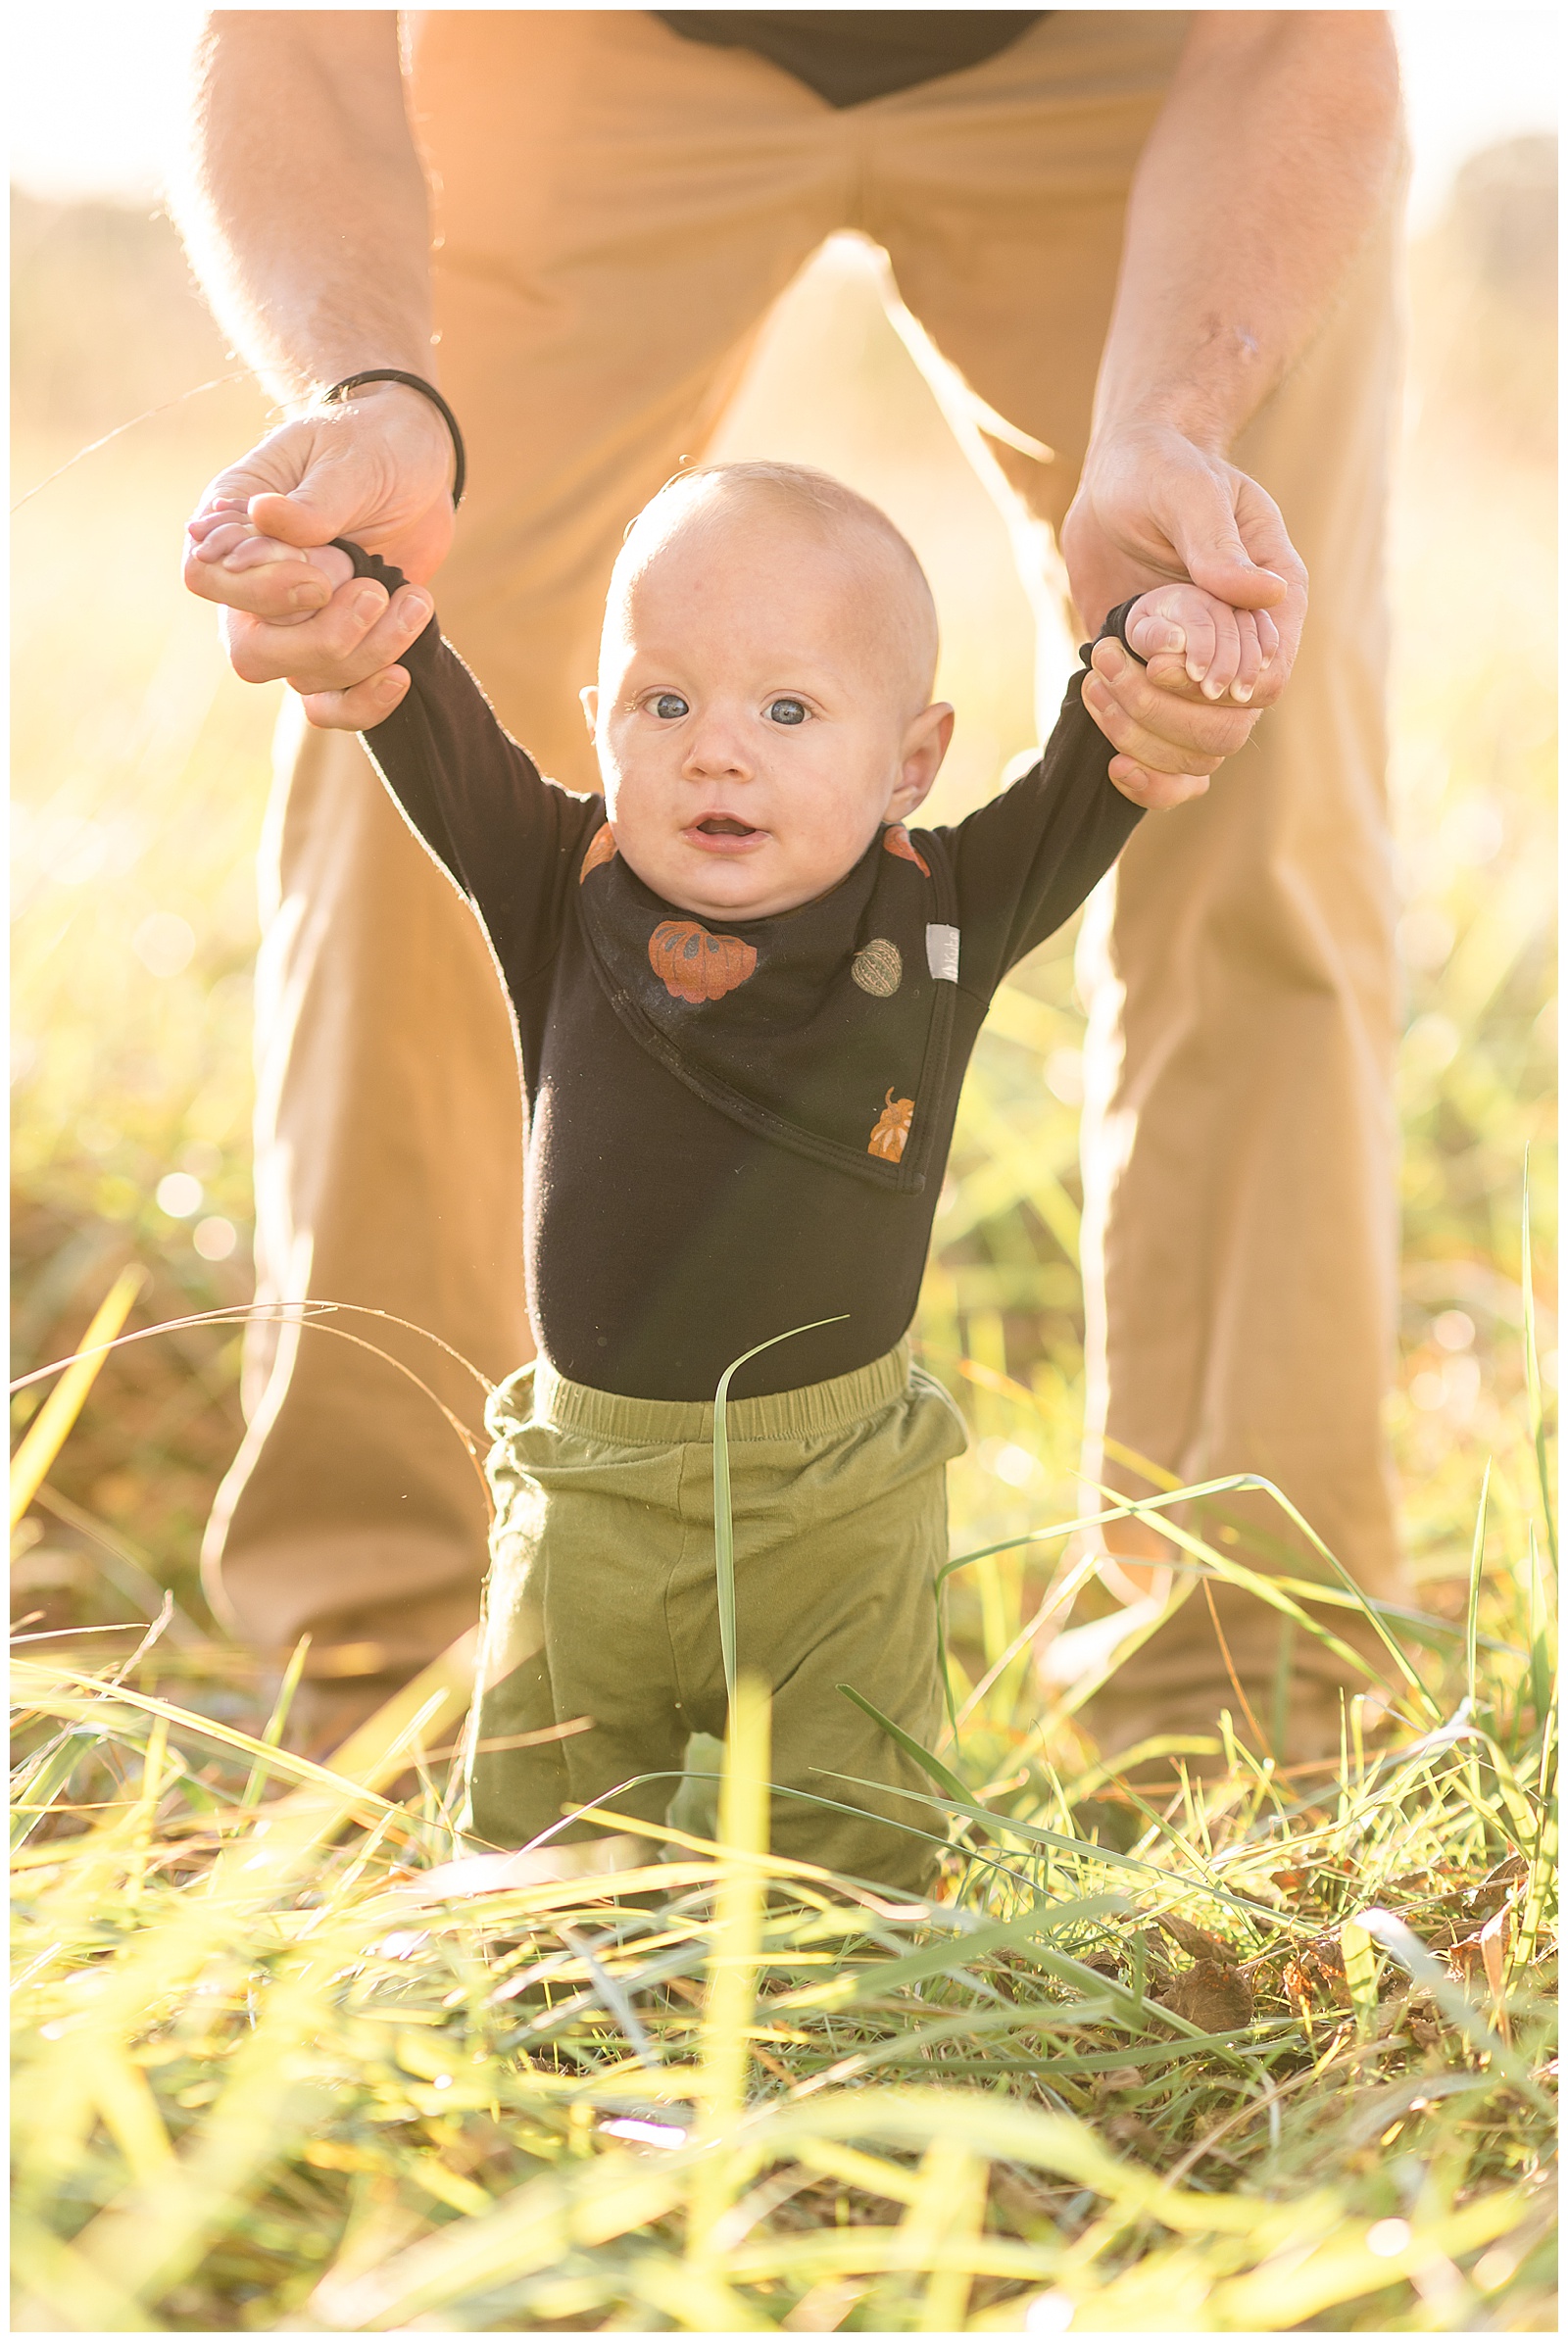 Rebecca Rice Photography captures baby boy in a field in Richmond, VA as he stands in the grass holding his dads hands.